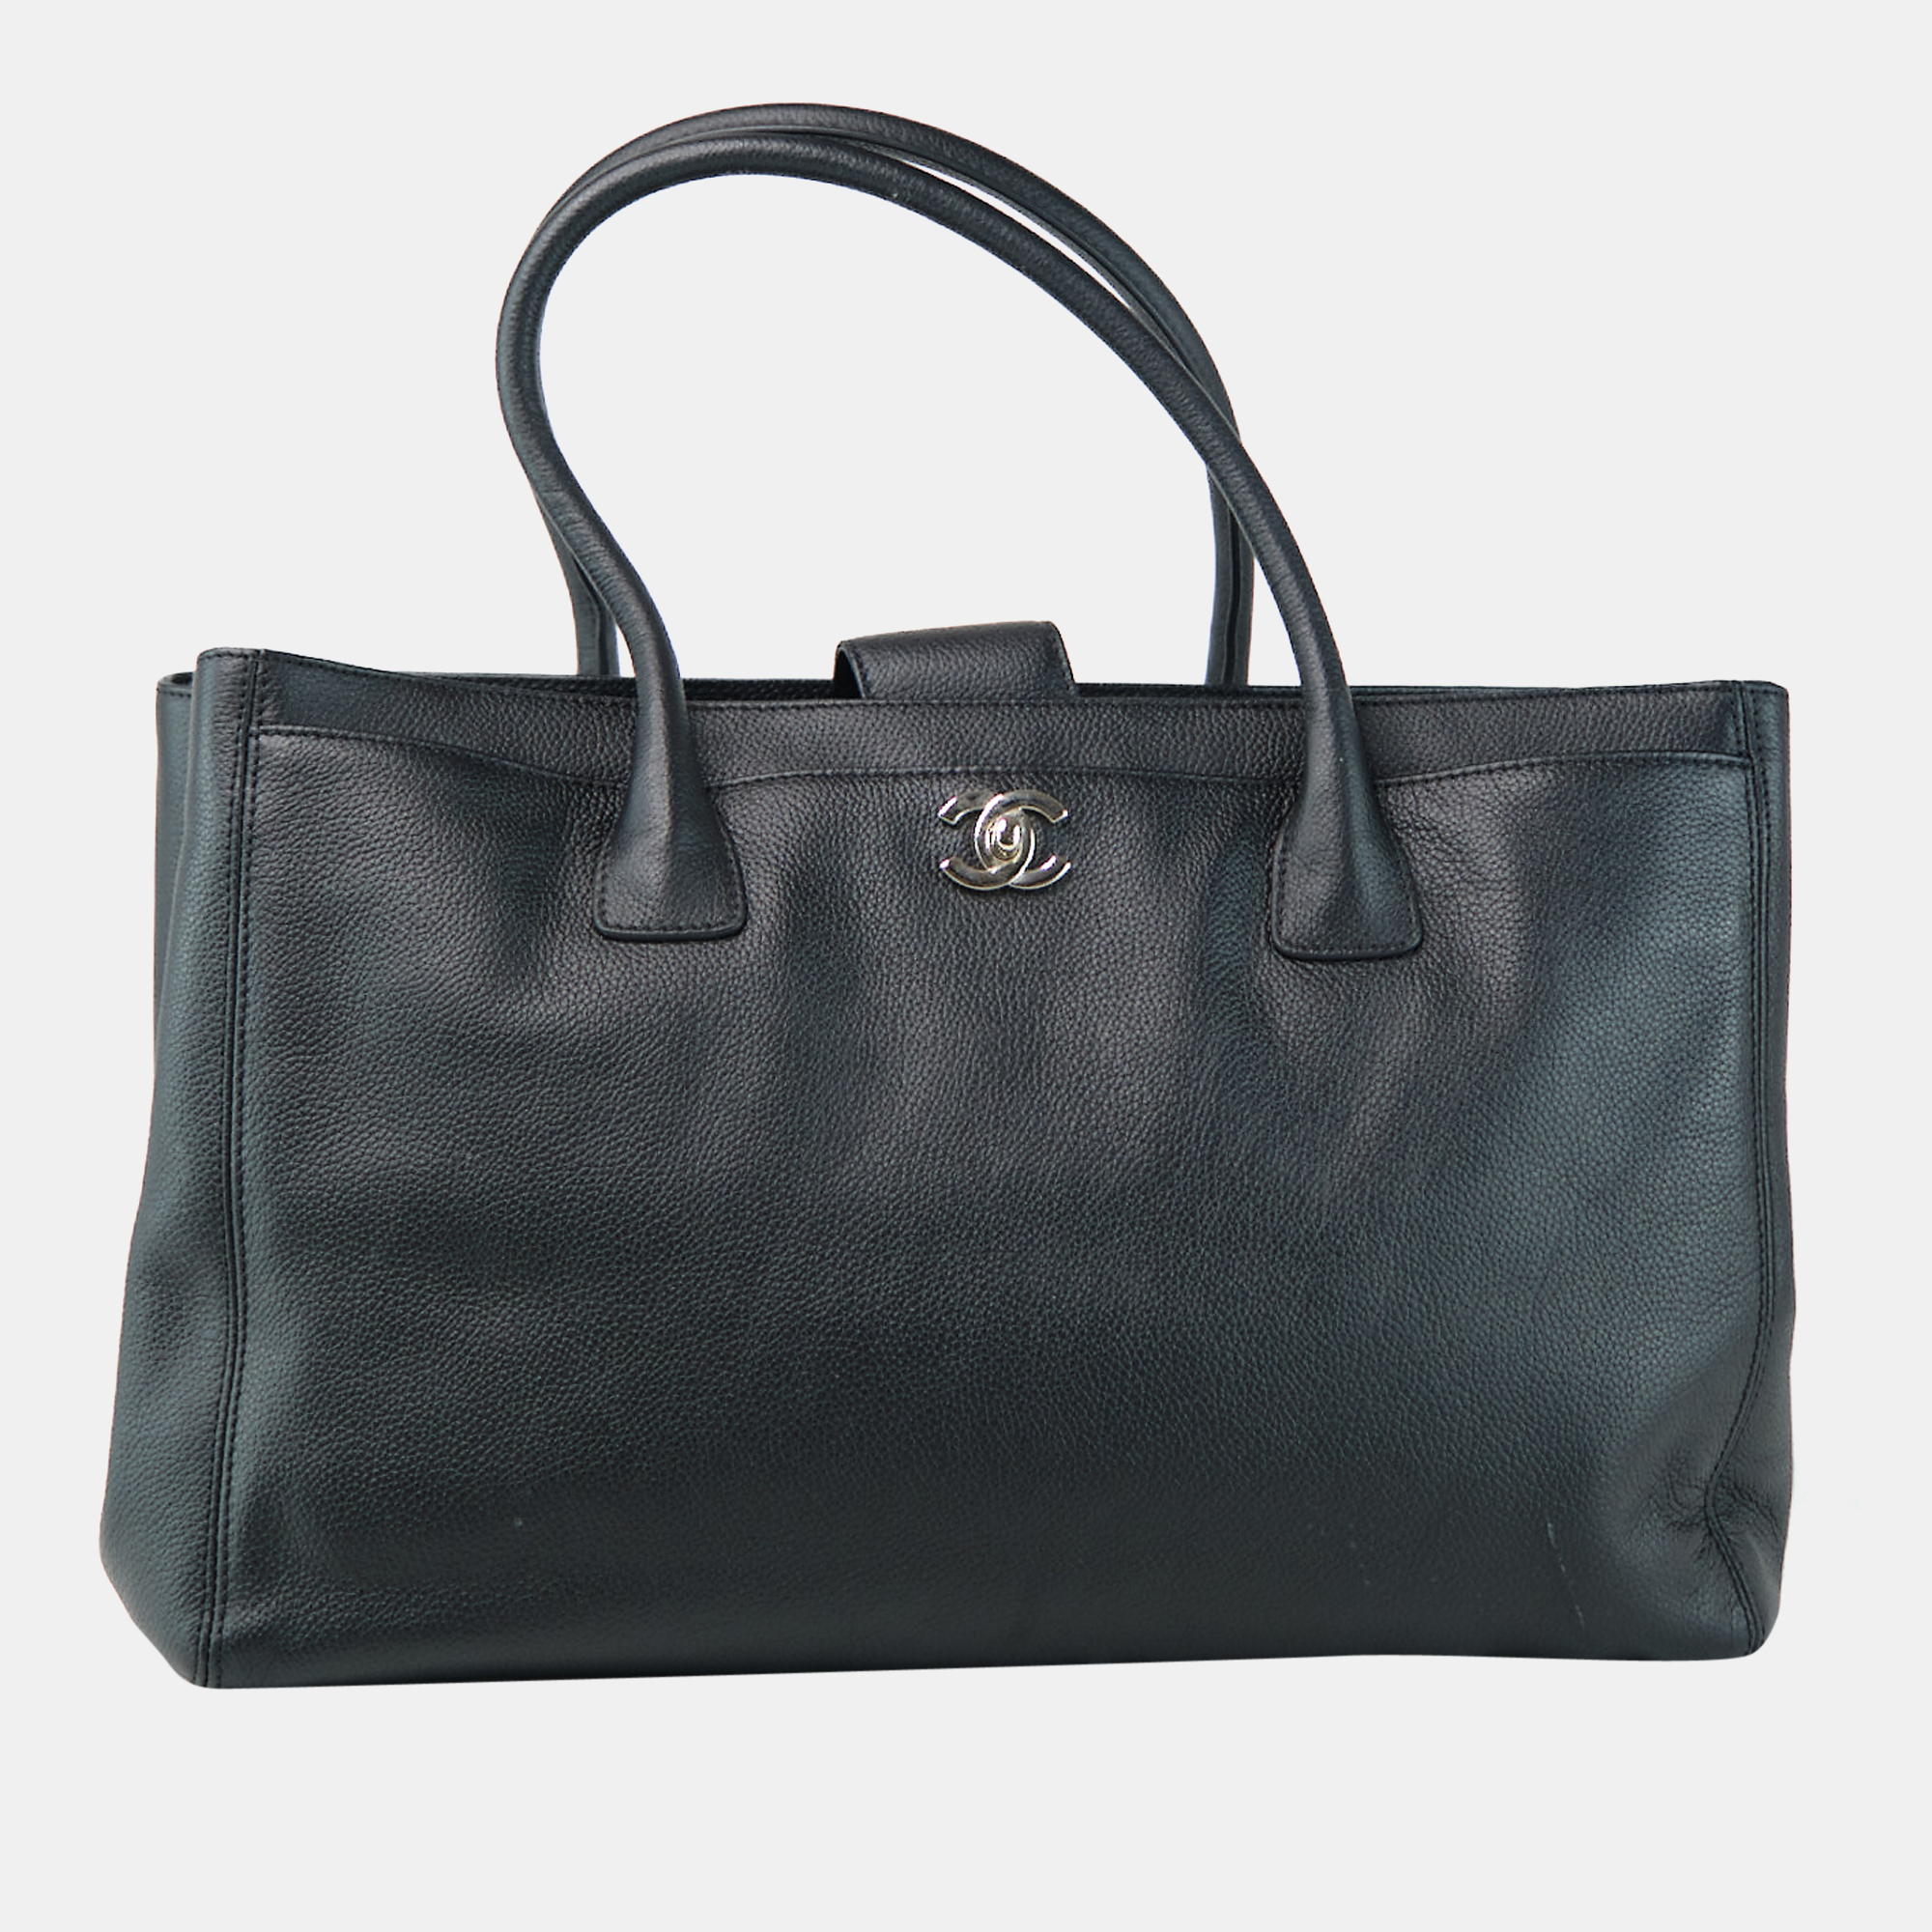 Chanel Cerf Tote: For the Modern Heiress